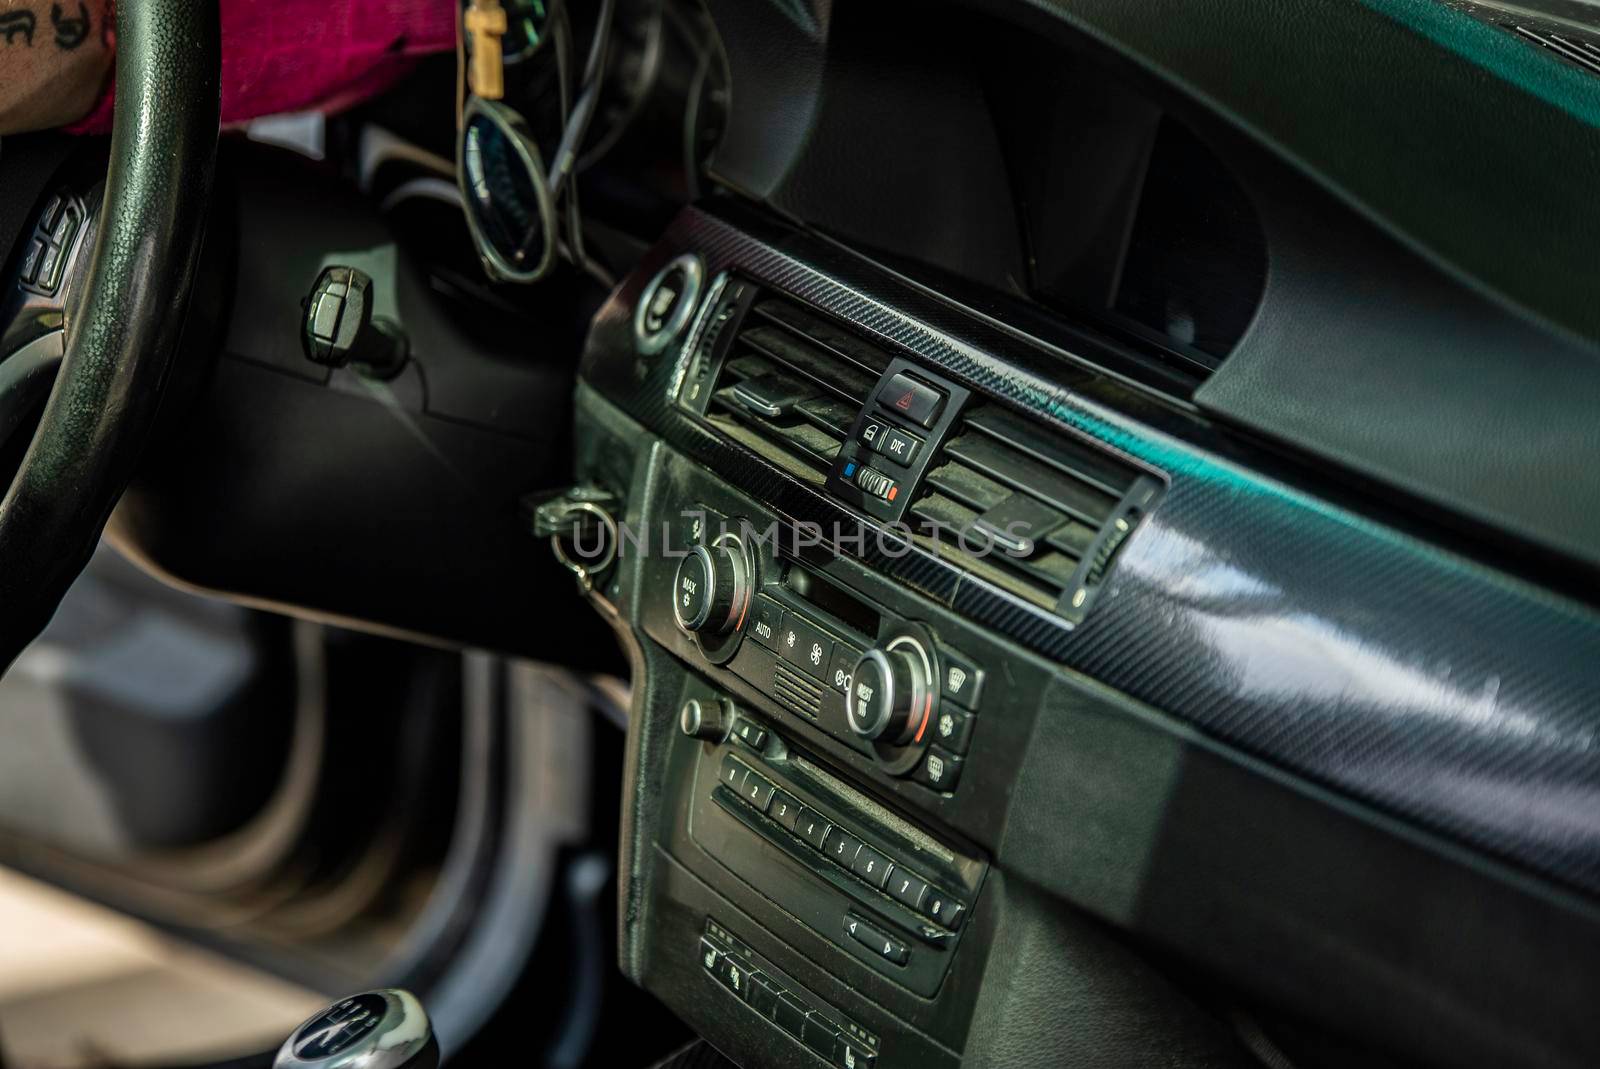 Center console of the car 3 by pippocarlot